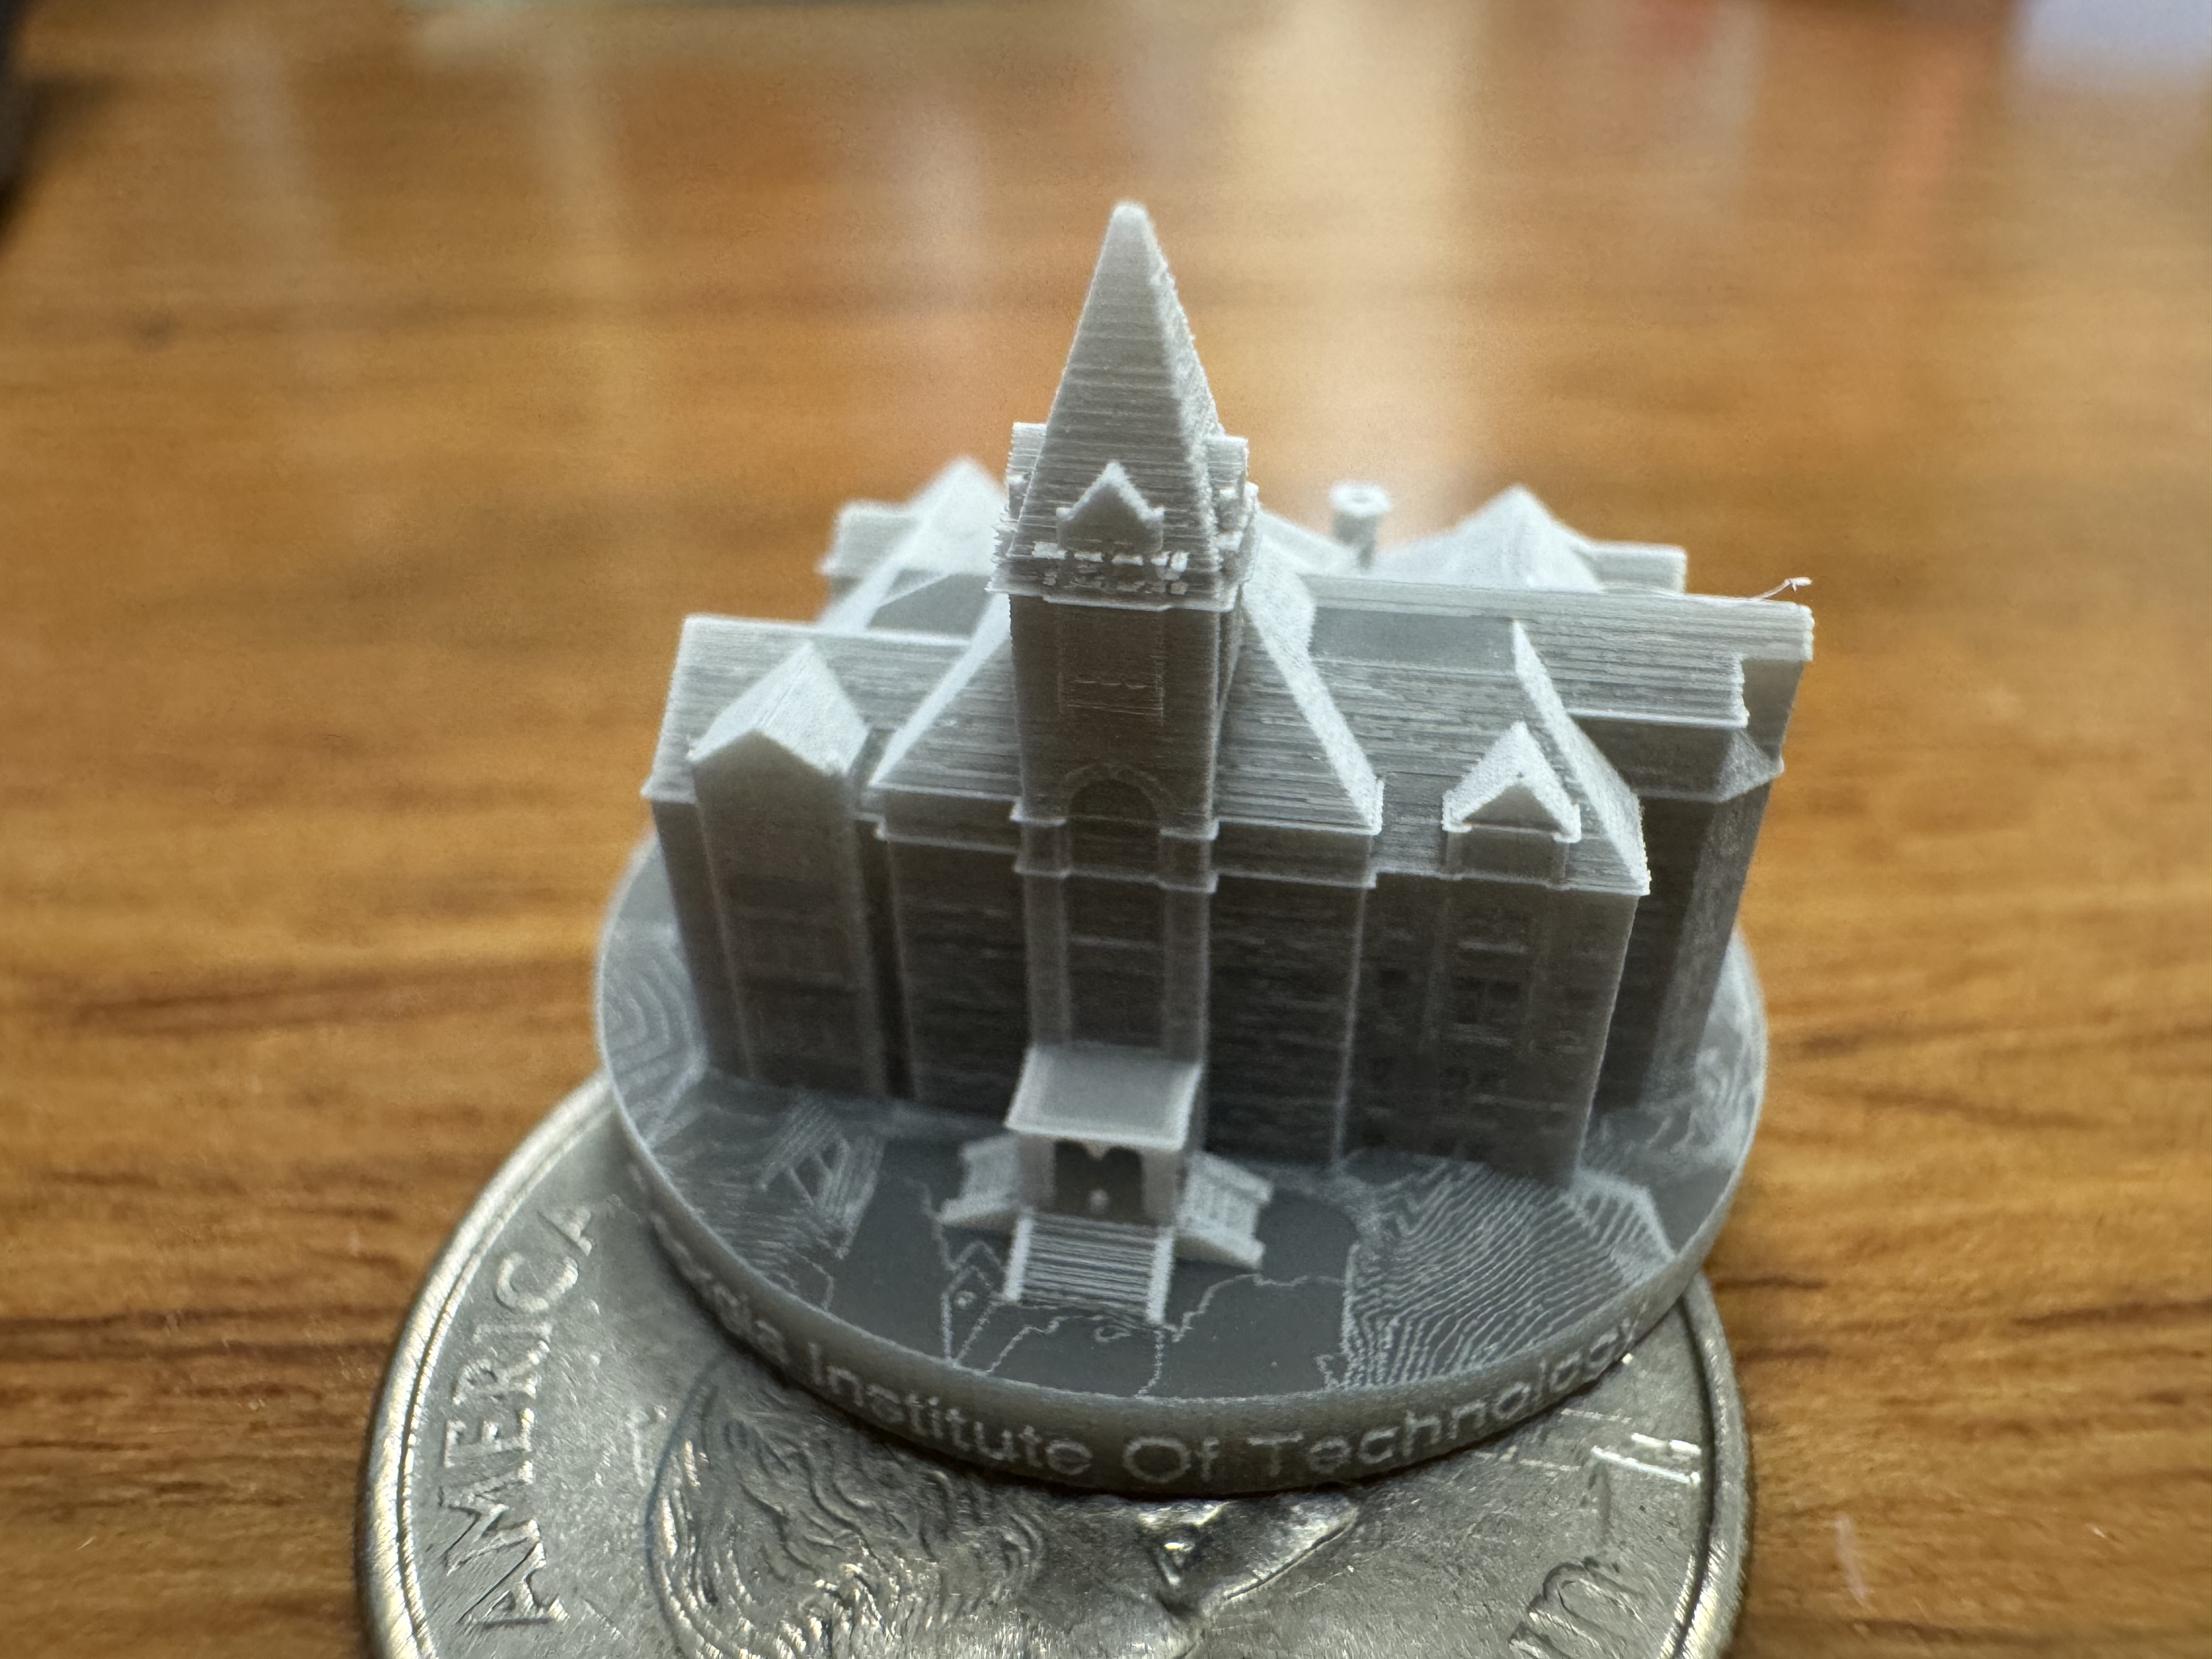 3D printed Tech Tower sitting on a coin using the new printer.